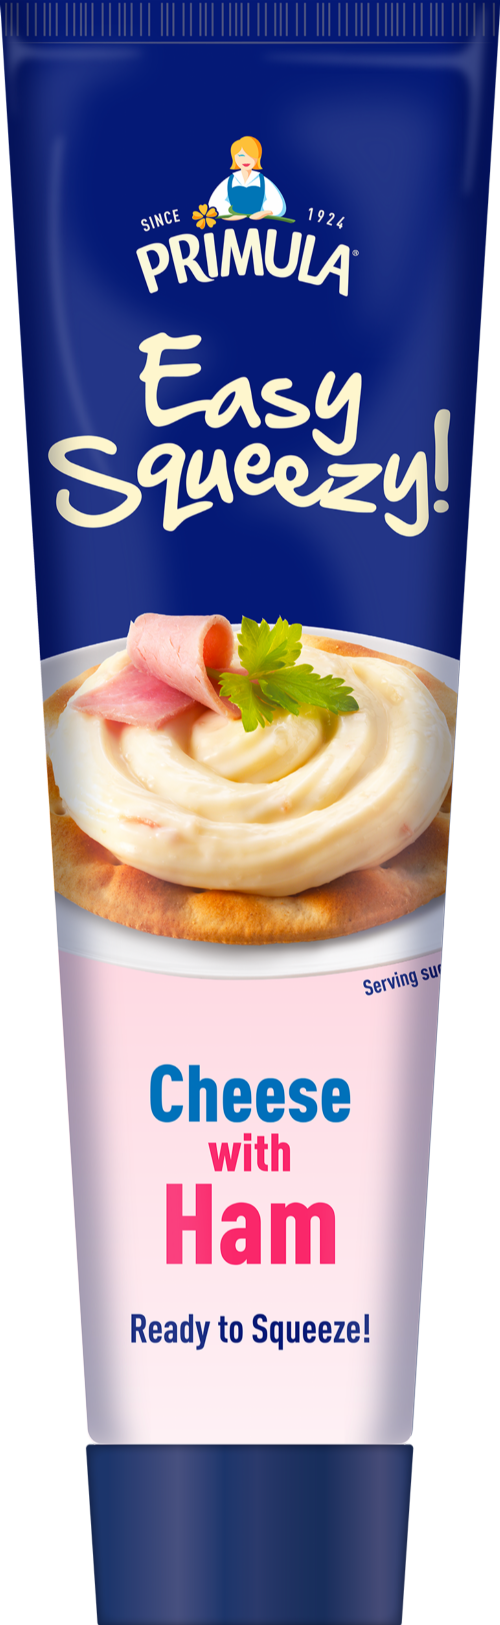 PRIMULA Easy Squeezy! Cheese with Ham 100g